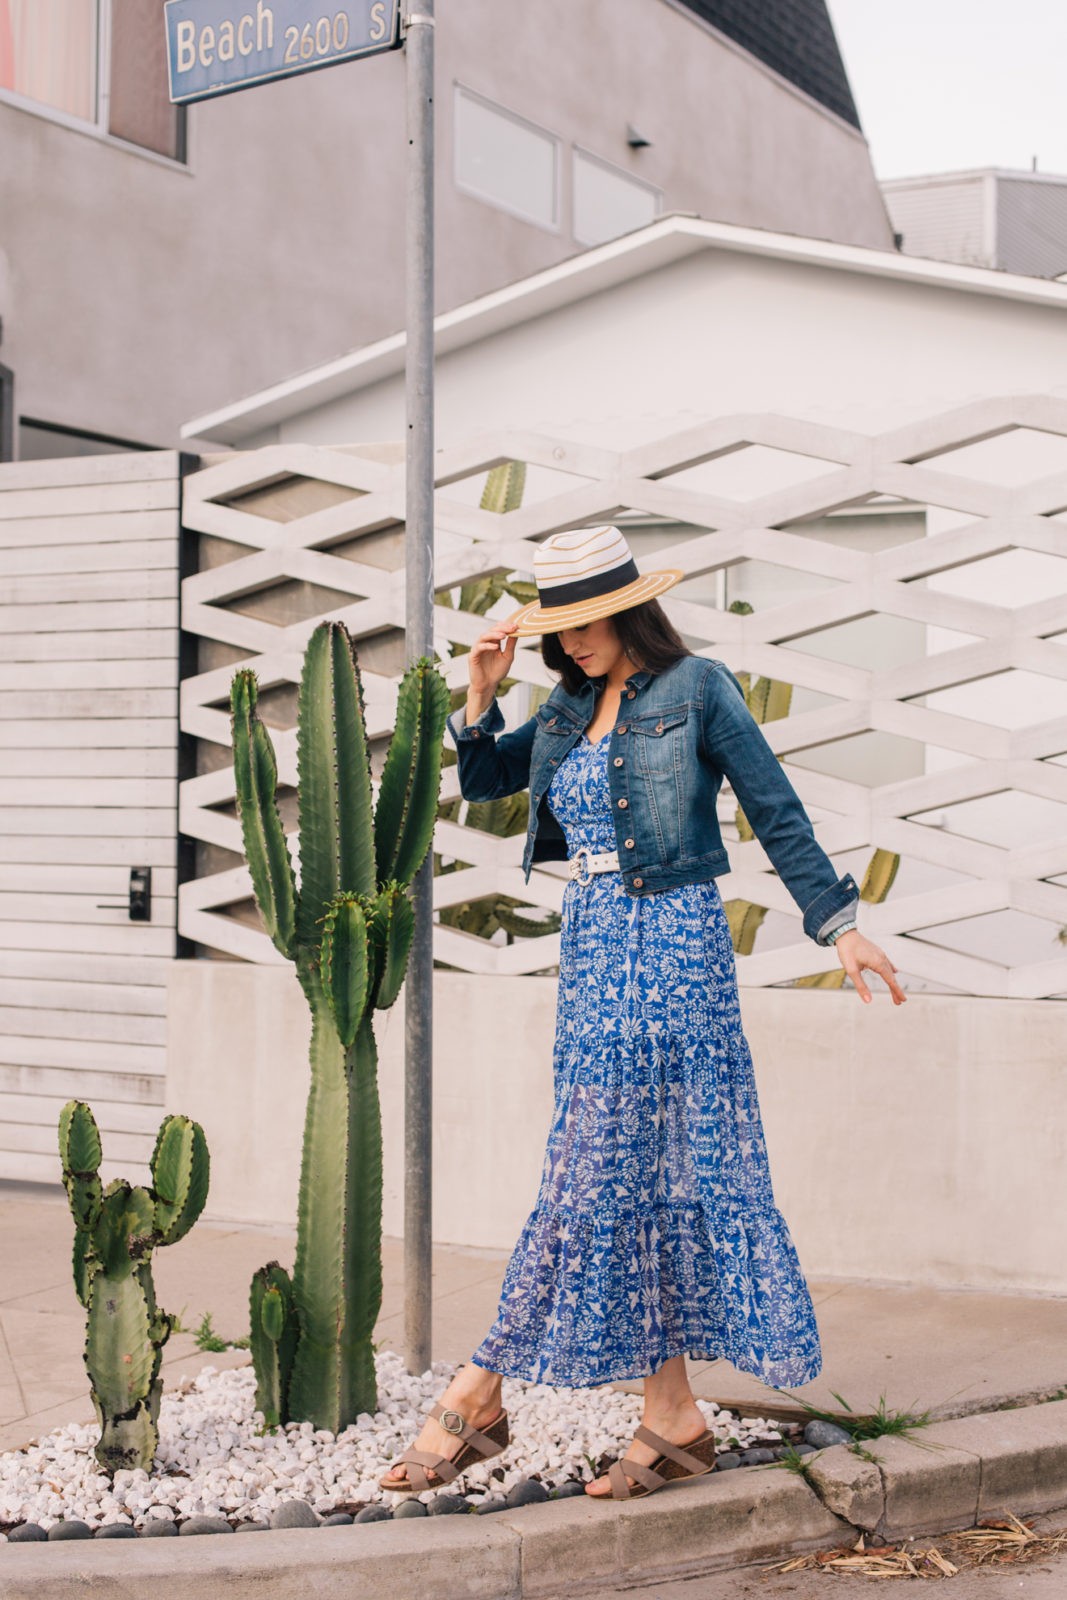 Dansko Sandals, summer essentials, styled by top US fashion blogger, Laura Lily: image of a woman wearing a floral maxi dress, denim jacket, Panama straw hat and Dansko sandals